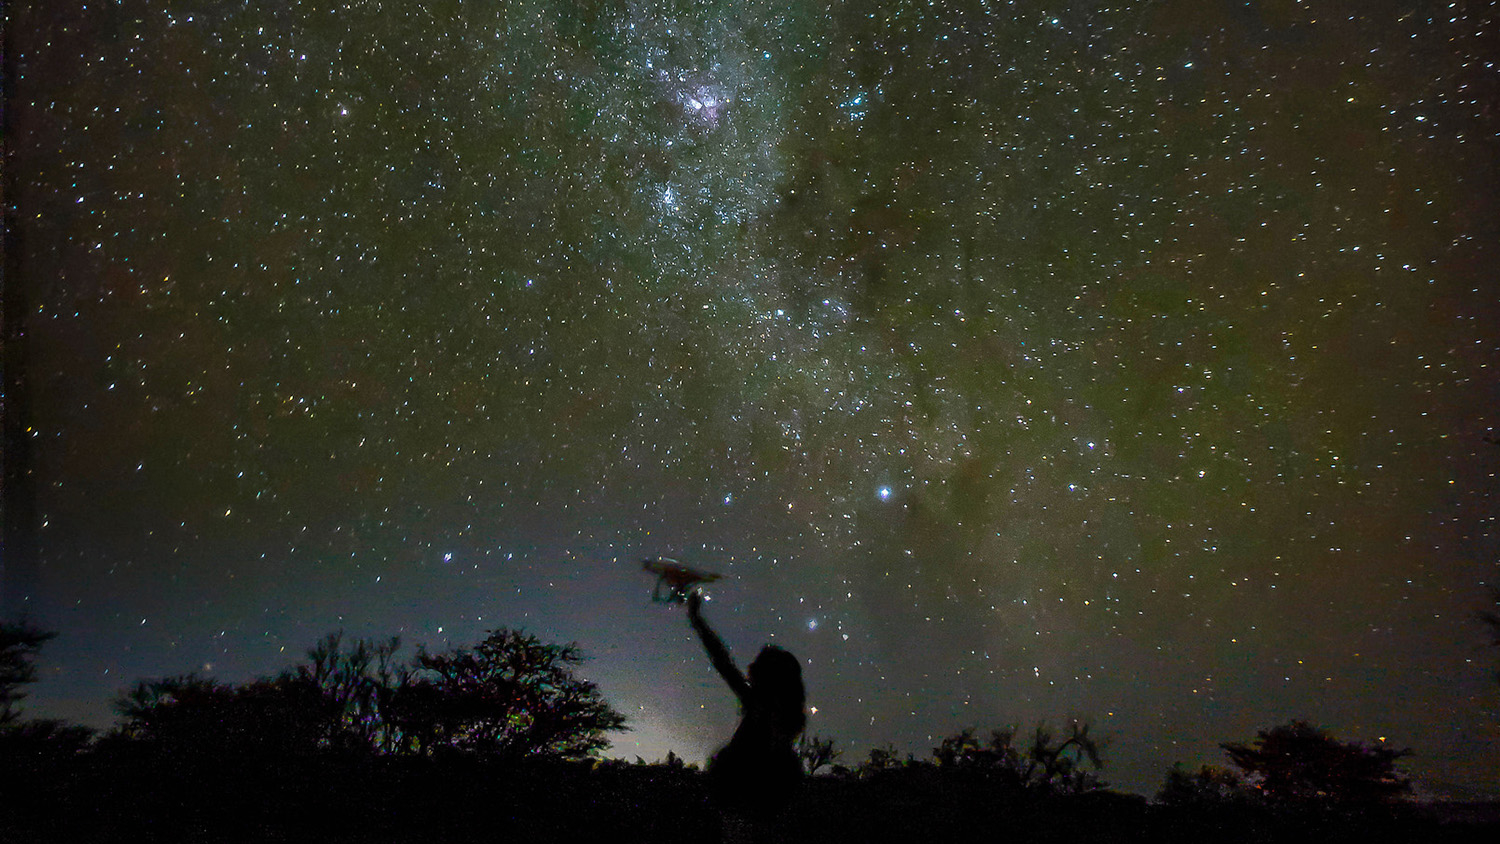 A researchers studying how drones can detect poachers and count wildlife in Namibia is juxtaposed against the Milky Way at night.